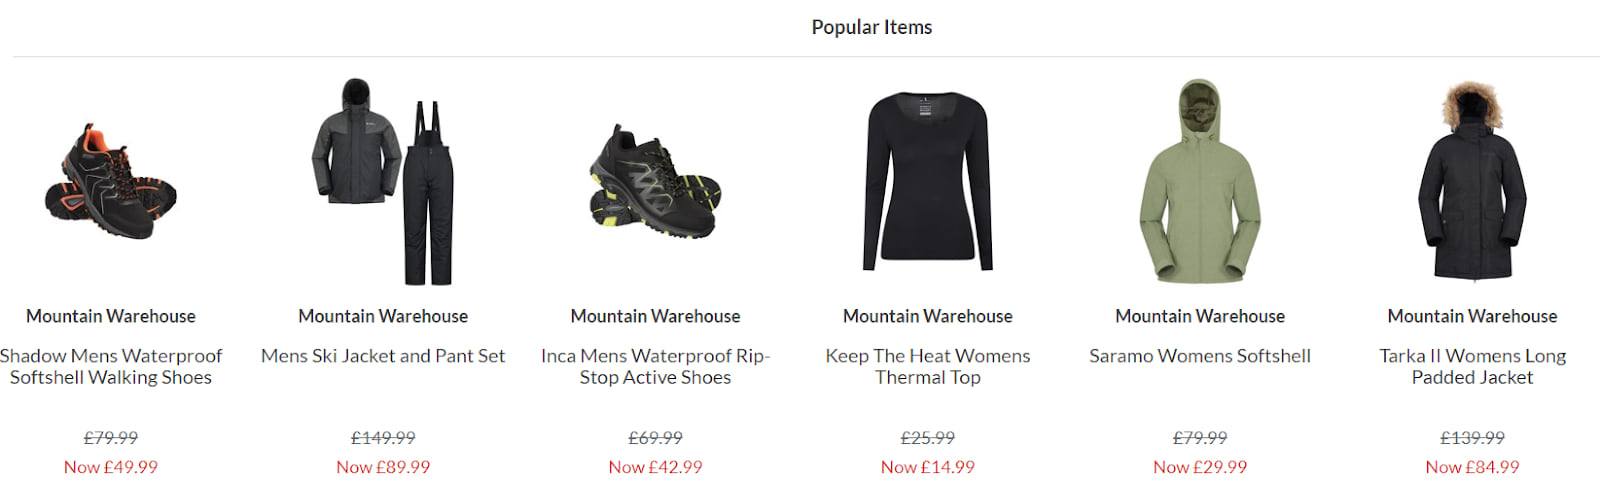 Is-Mountain-Warehouse-a-good-brand-2